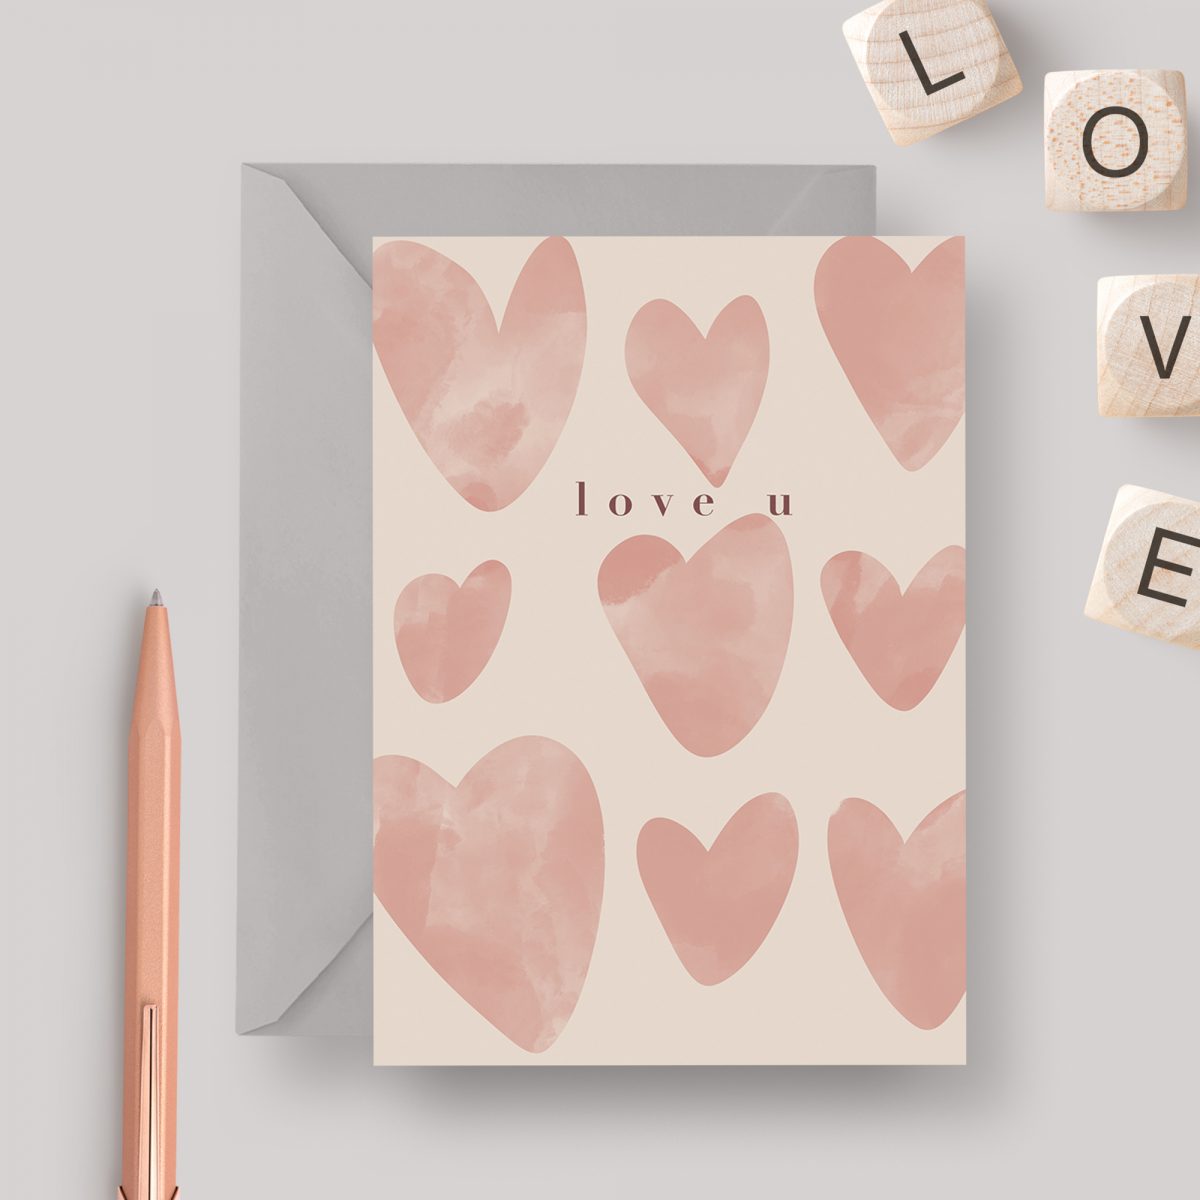 Love You A6 greeting card with grey envelope